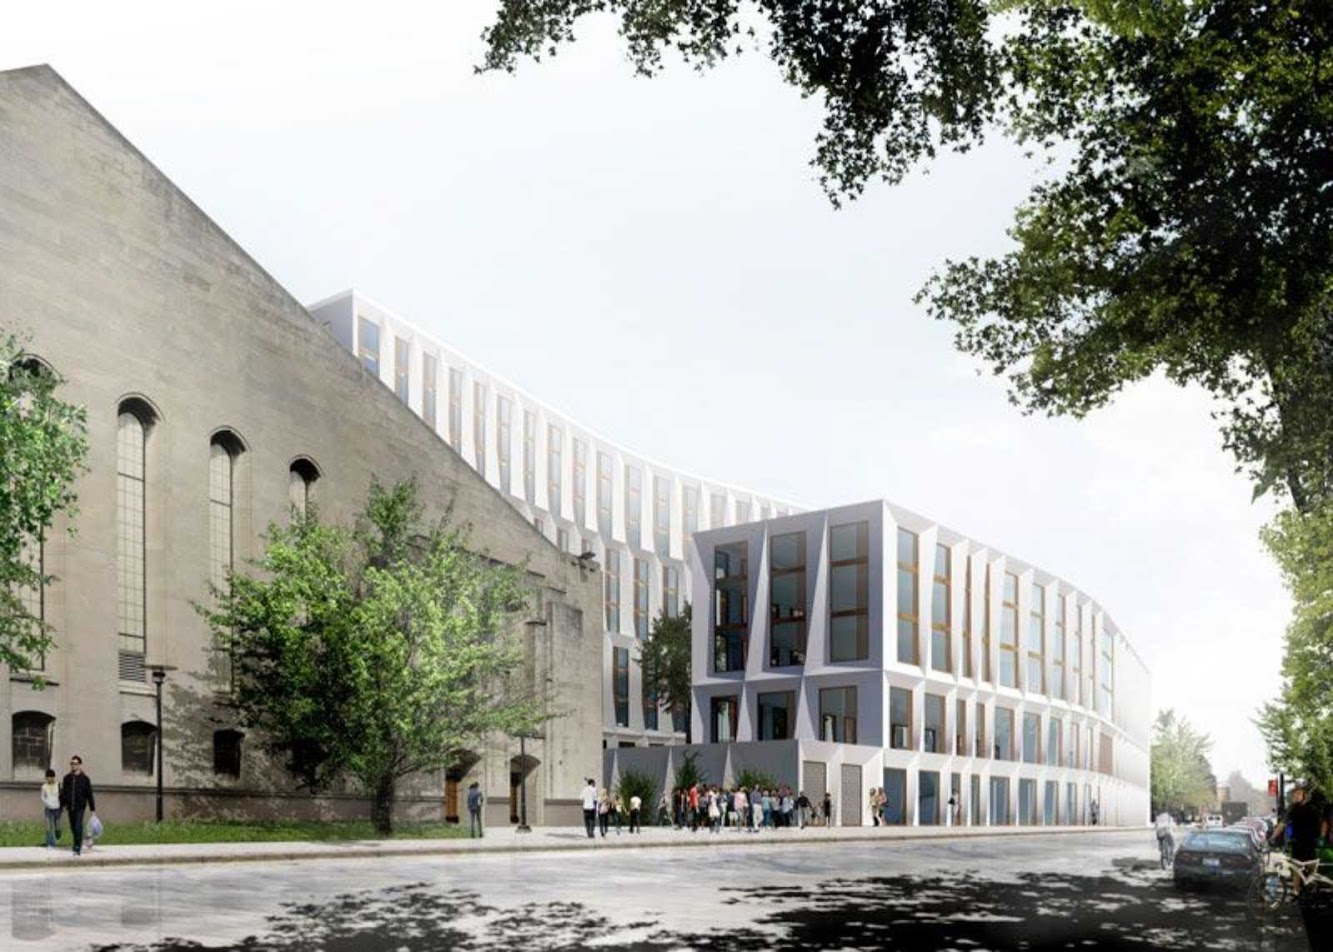 Residence Hall for University of Chicago by Studio